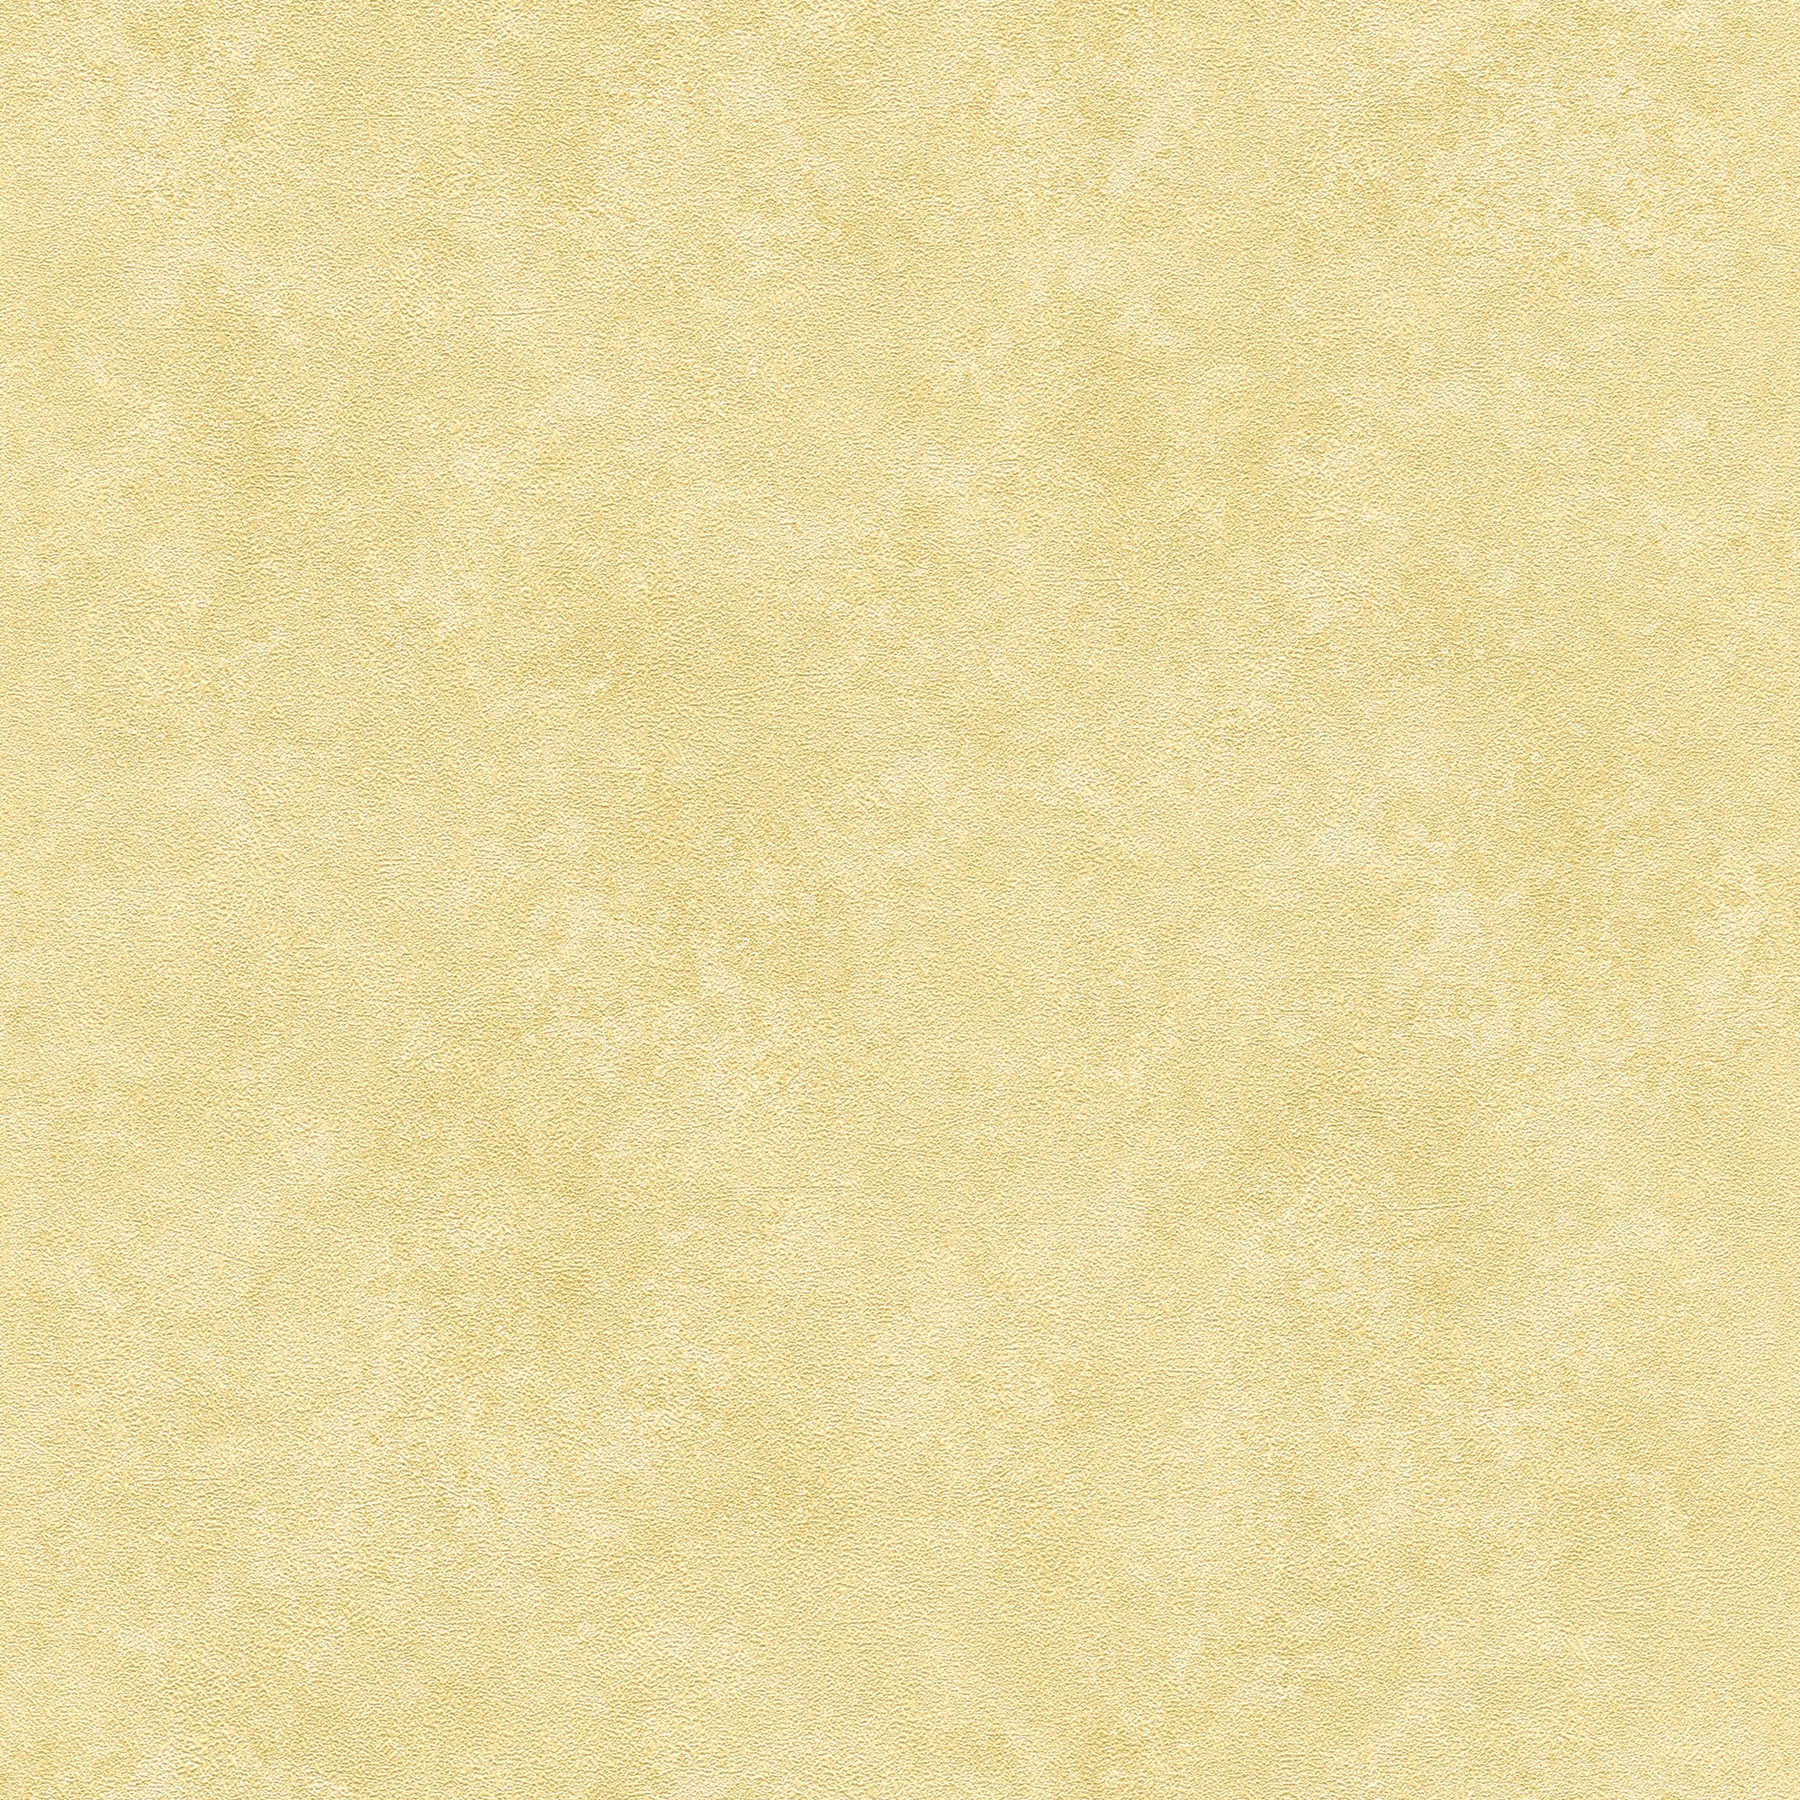 Plain wallpaper colour shaded, natural texture pattern - yellow
